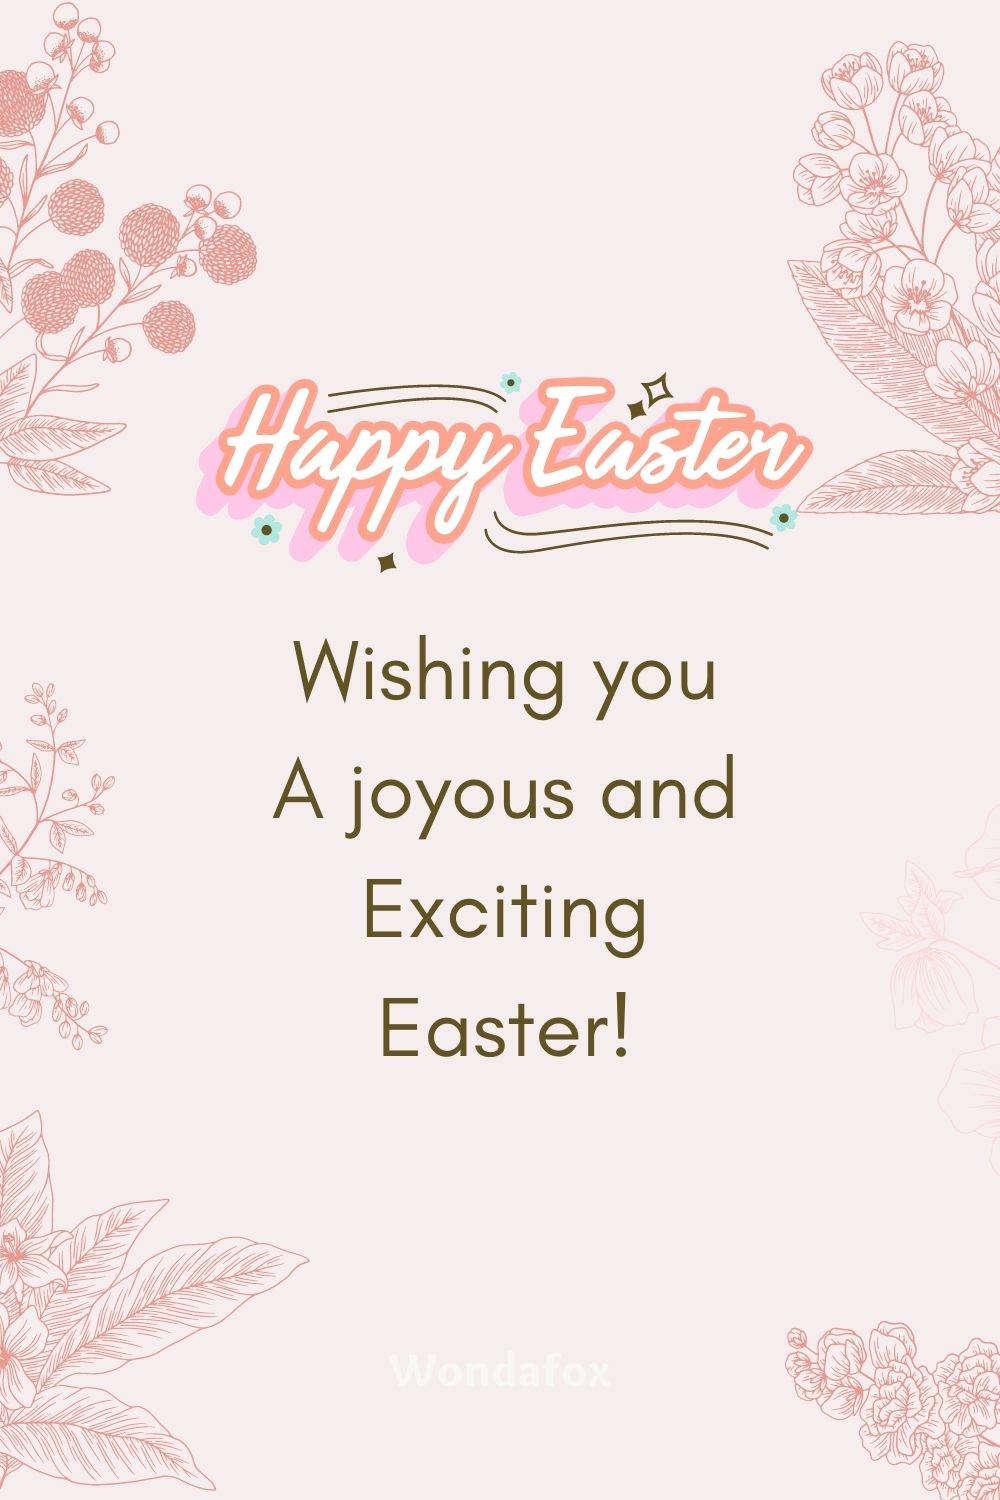 Happy Easter! Wishing you a joyous and exciting Easter!